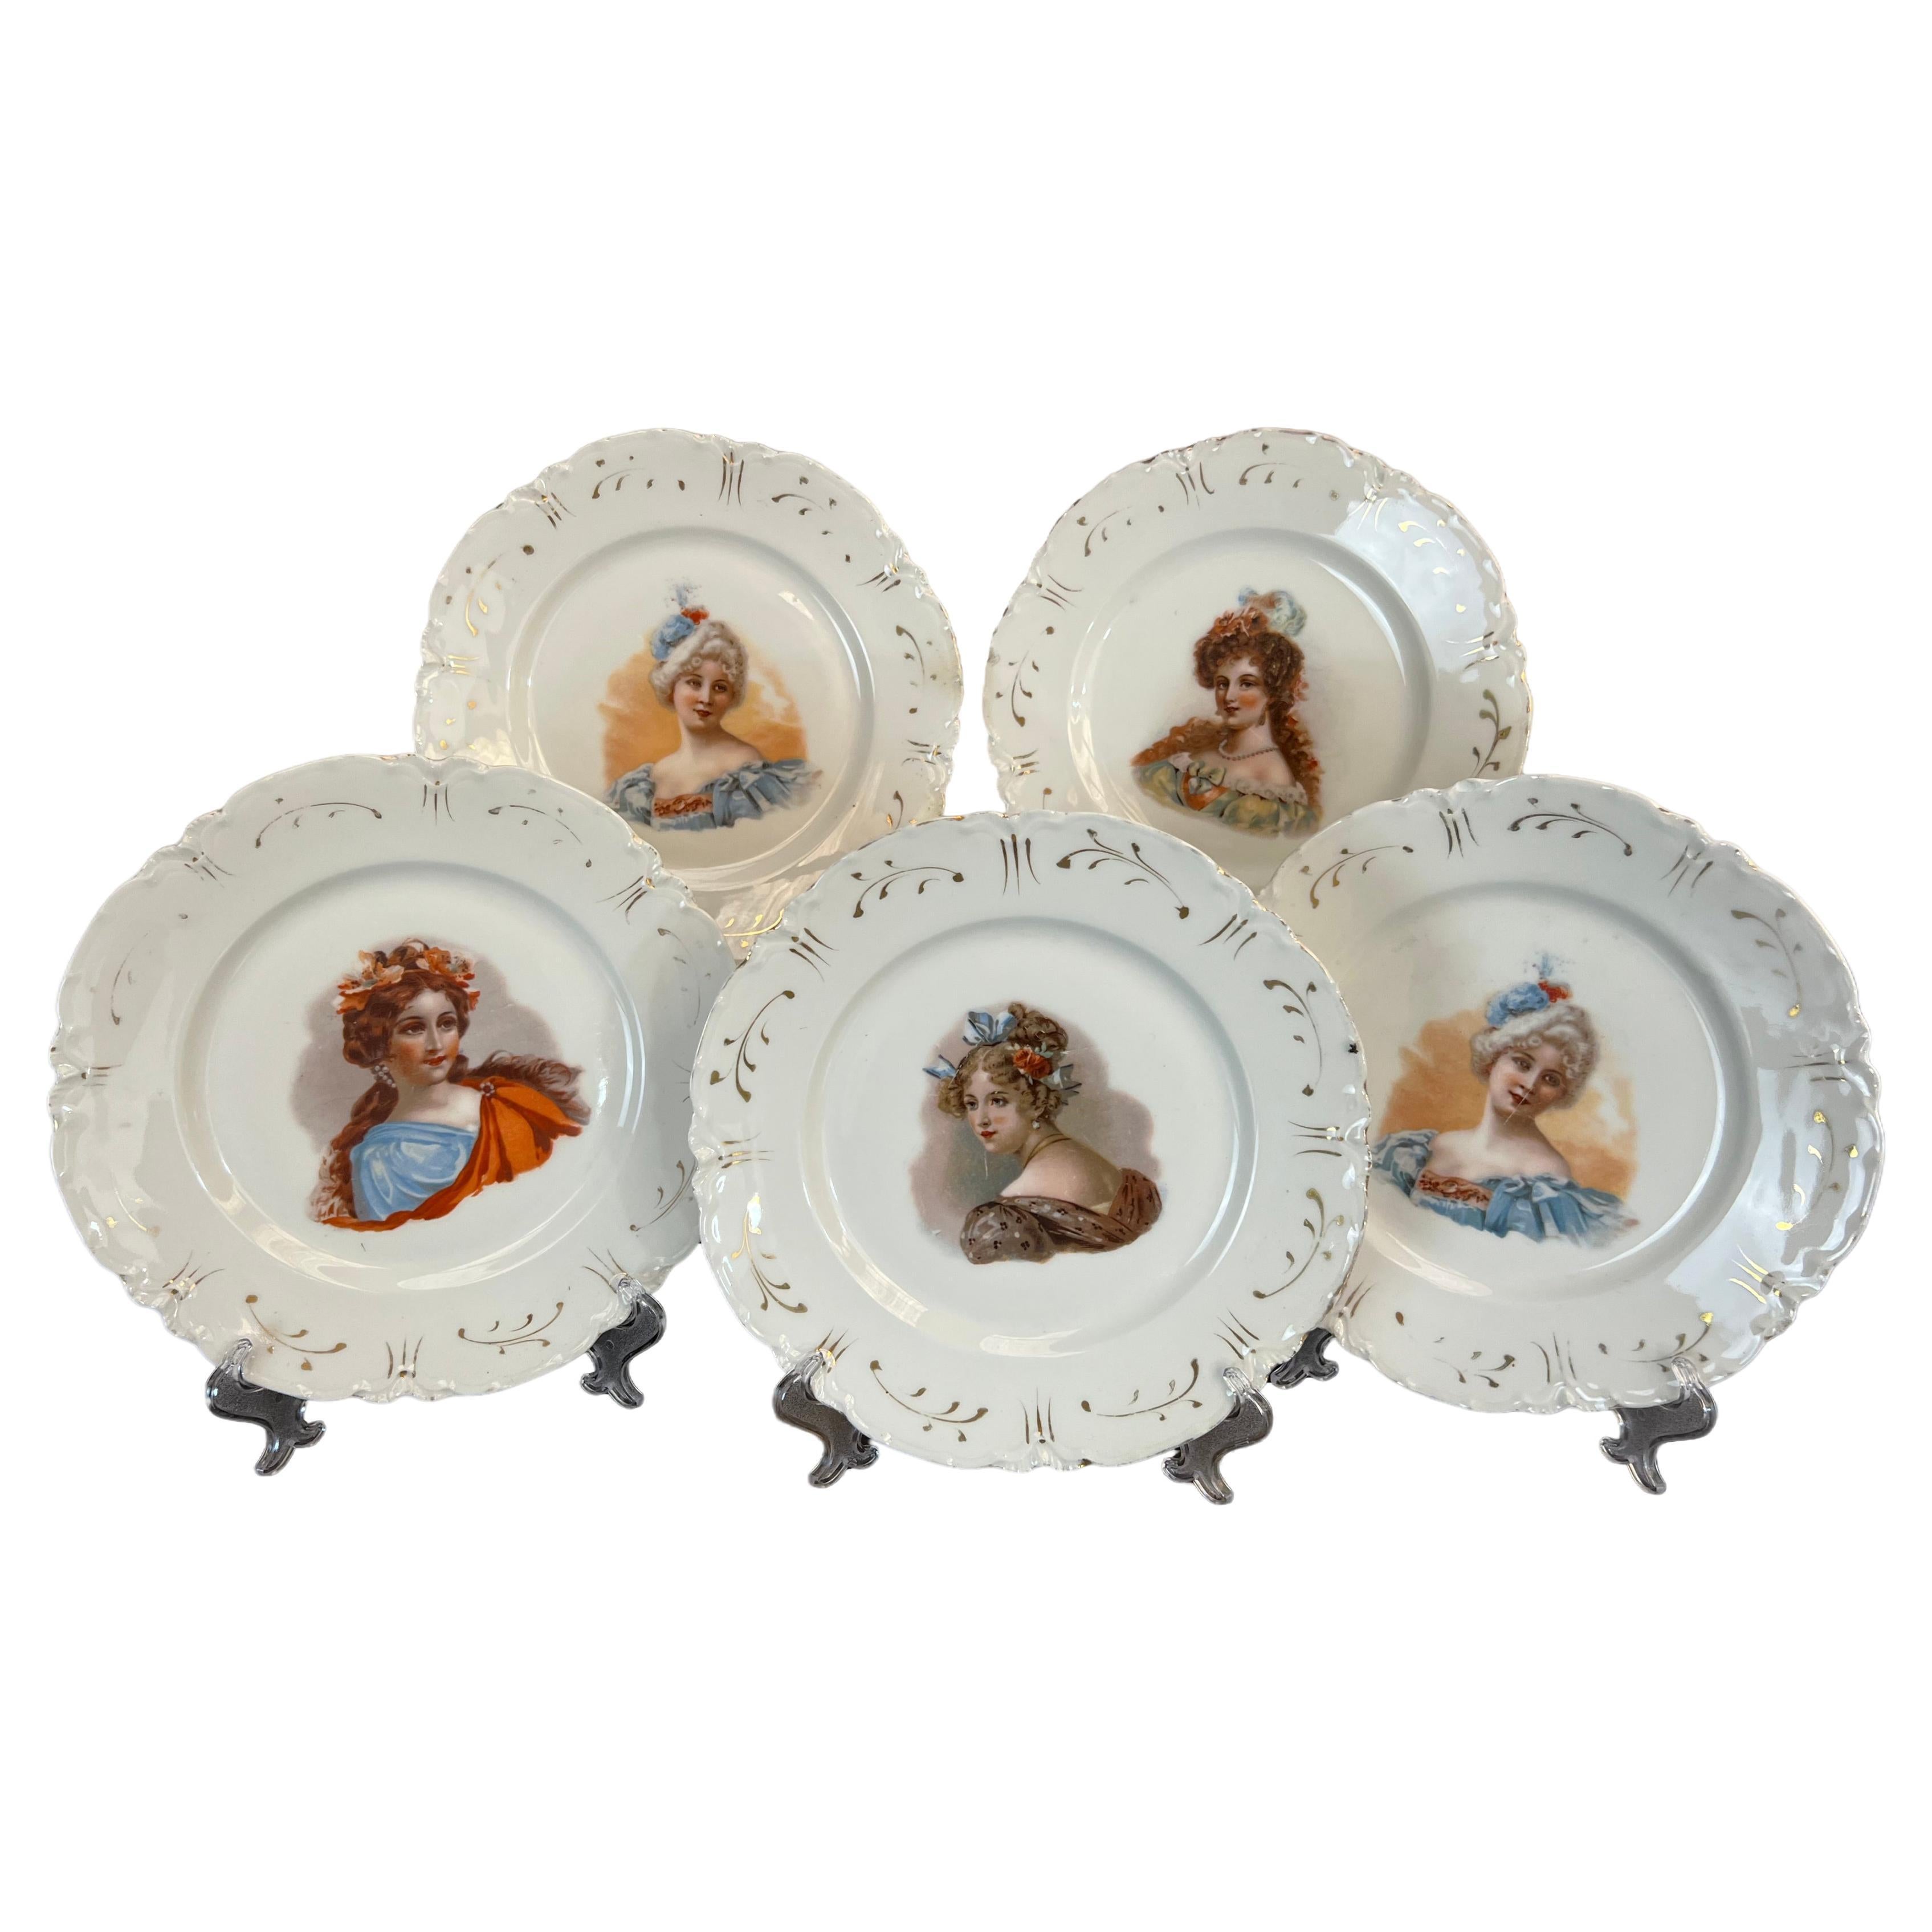 Set 5 collectible plates Haviland Limoges with women 19th